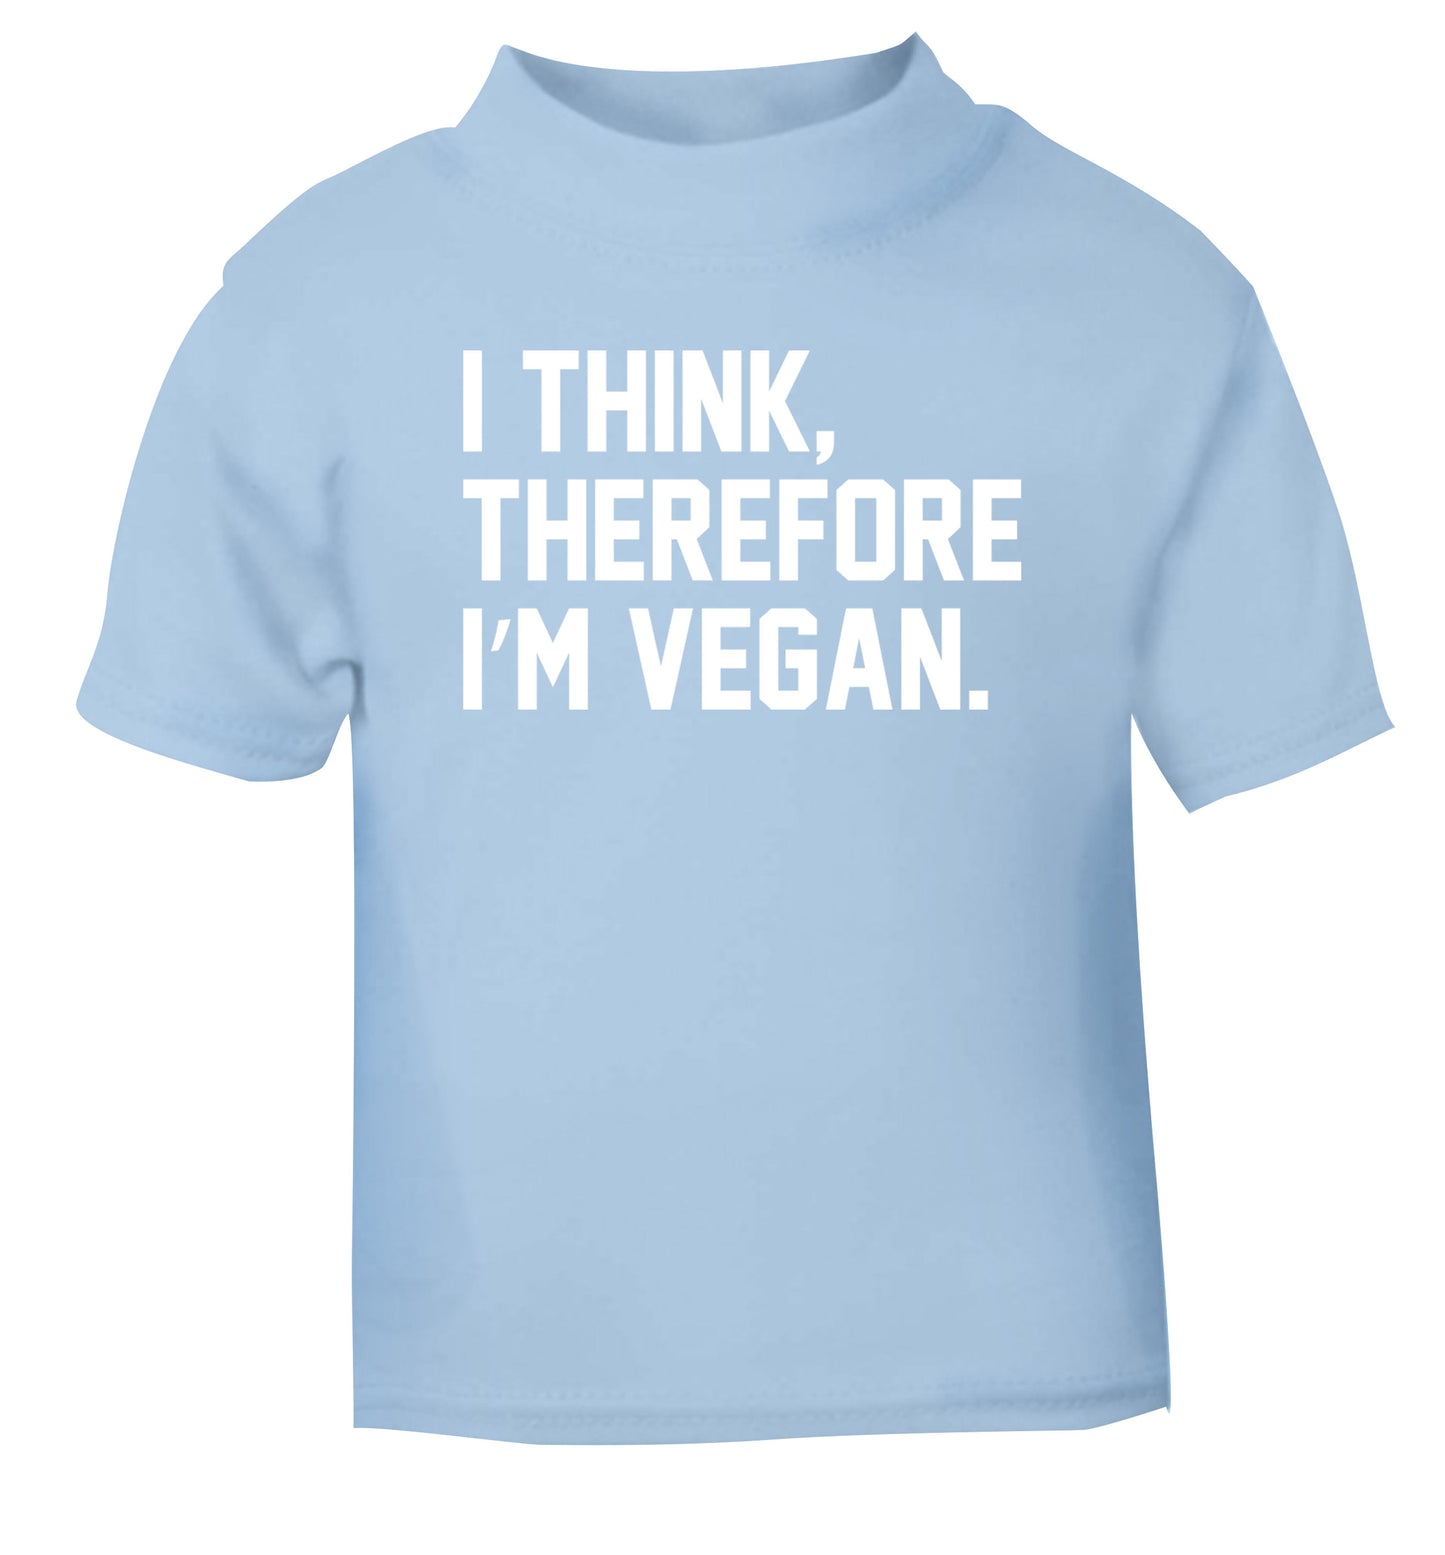 I think therefore I'm vegan light blue Baby Toddler Tshirt 2 Years